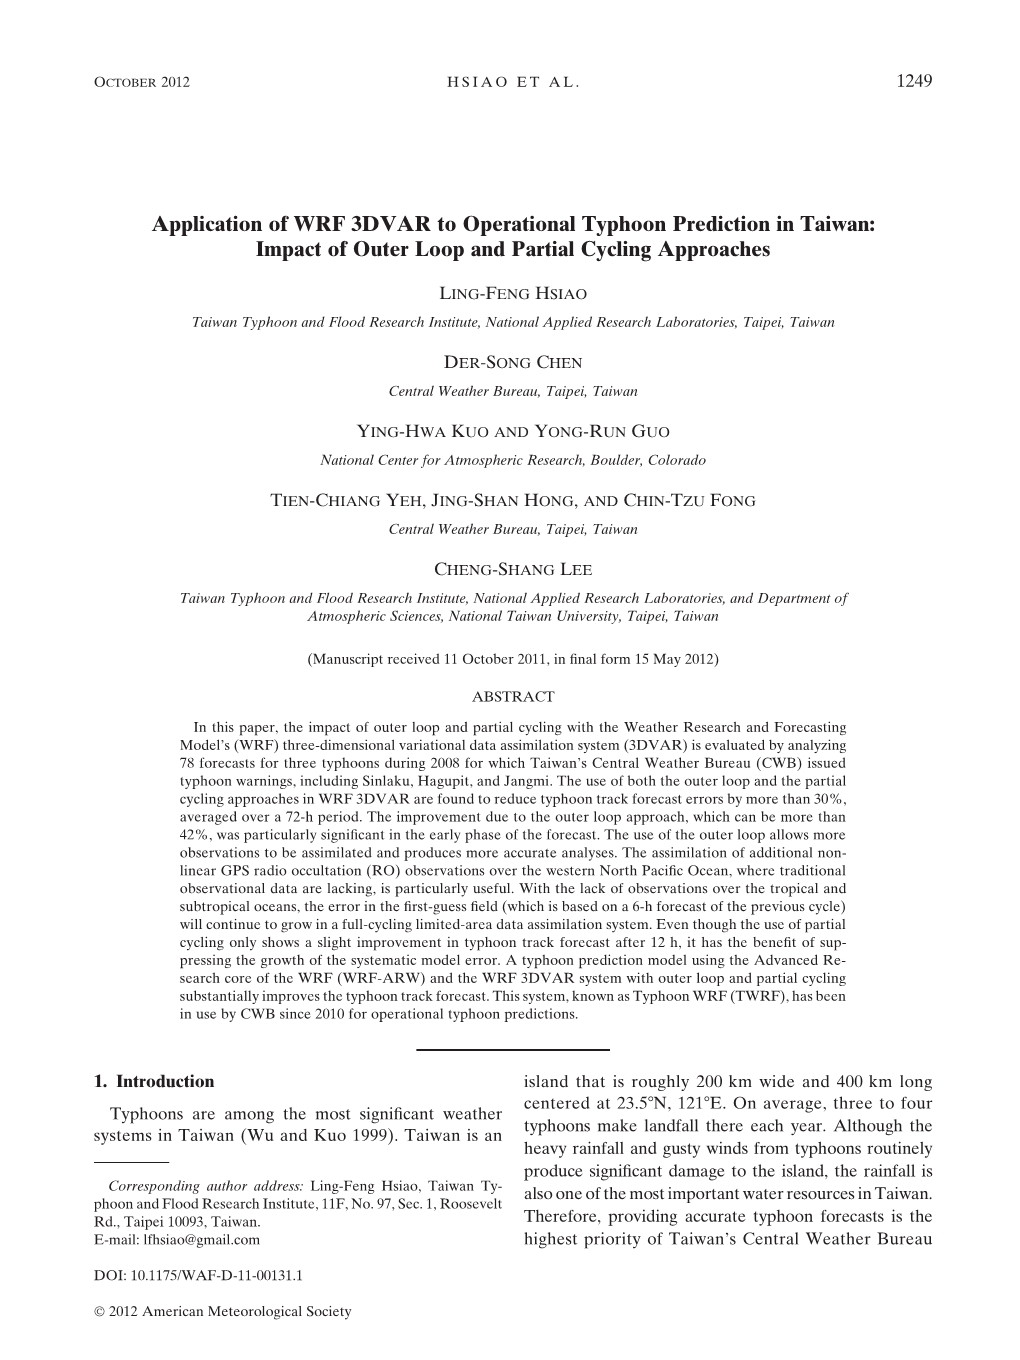 Application of WRF 3DVAR to Operational Typhoon Prediction in Taiwan: Impact of Outer Loop and Partial Cycling Approaches